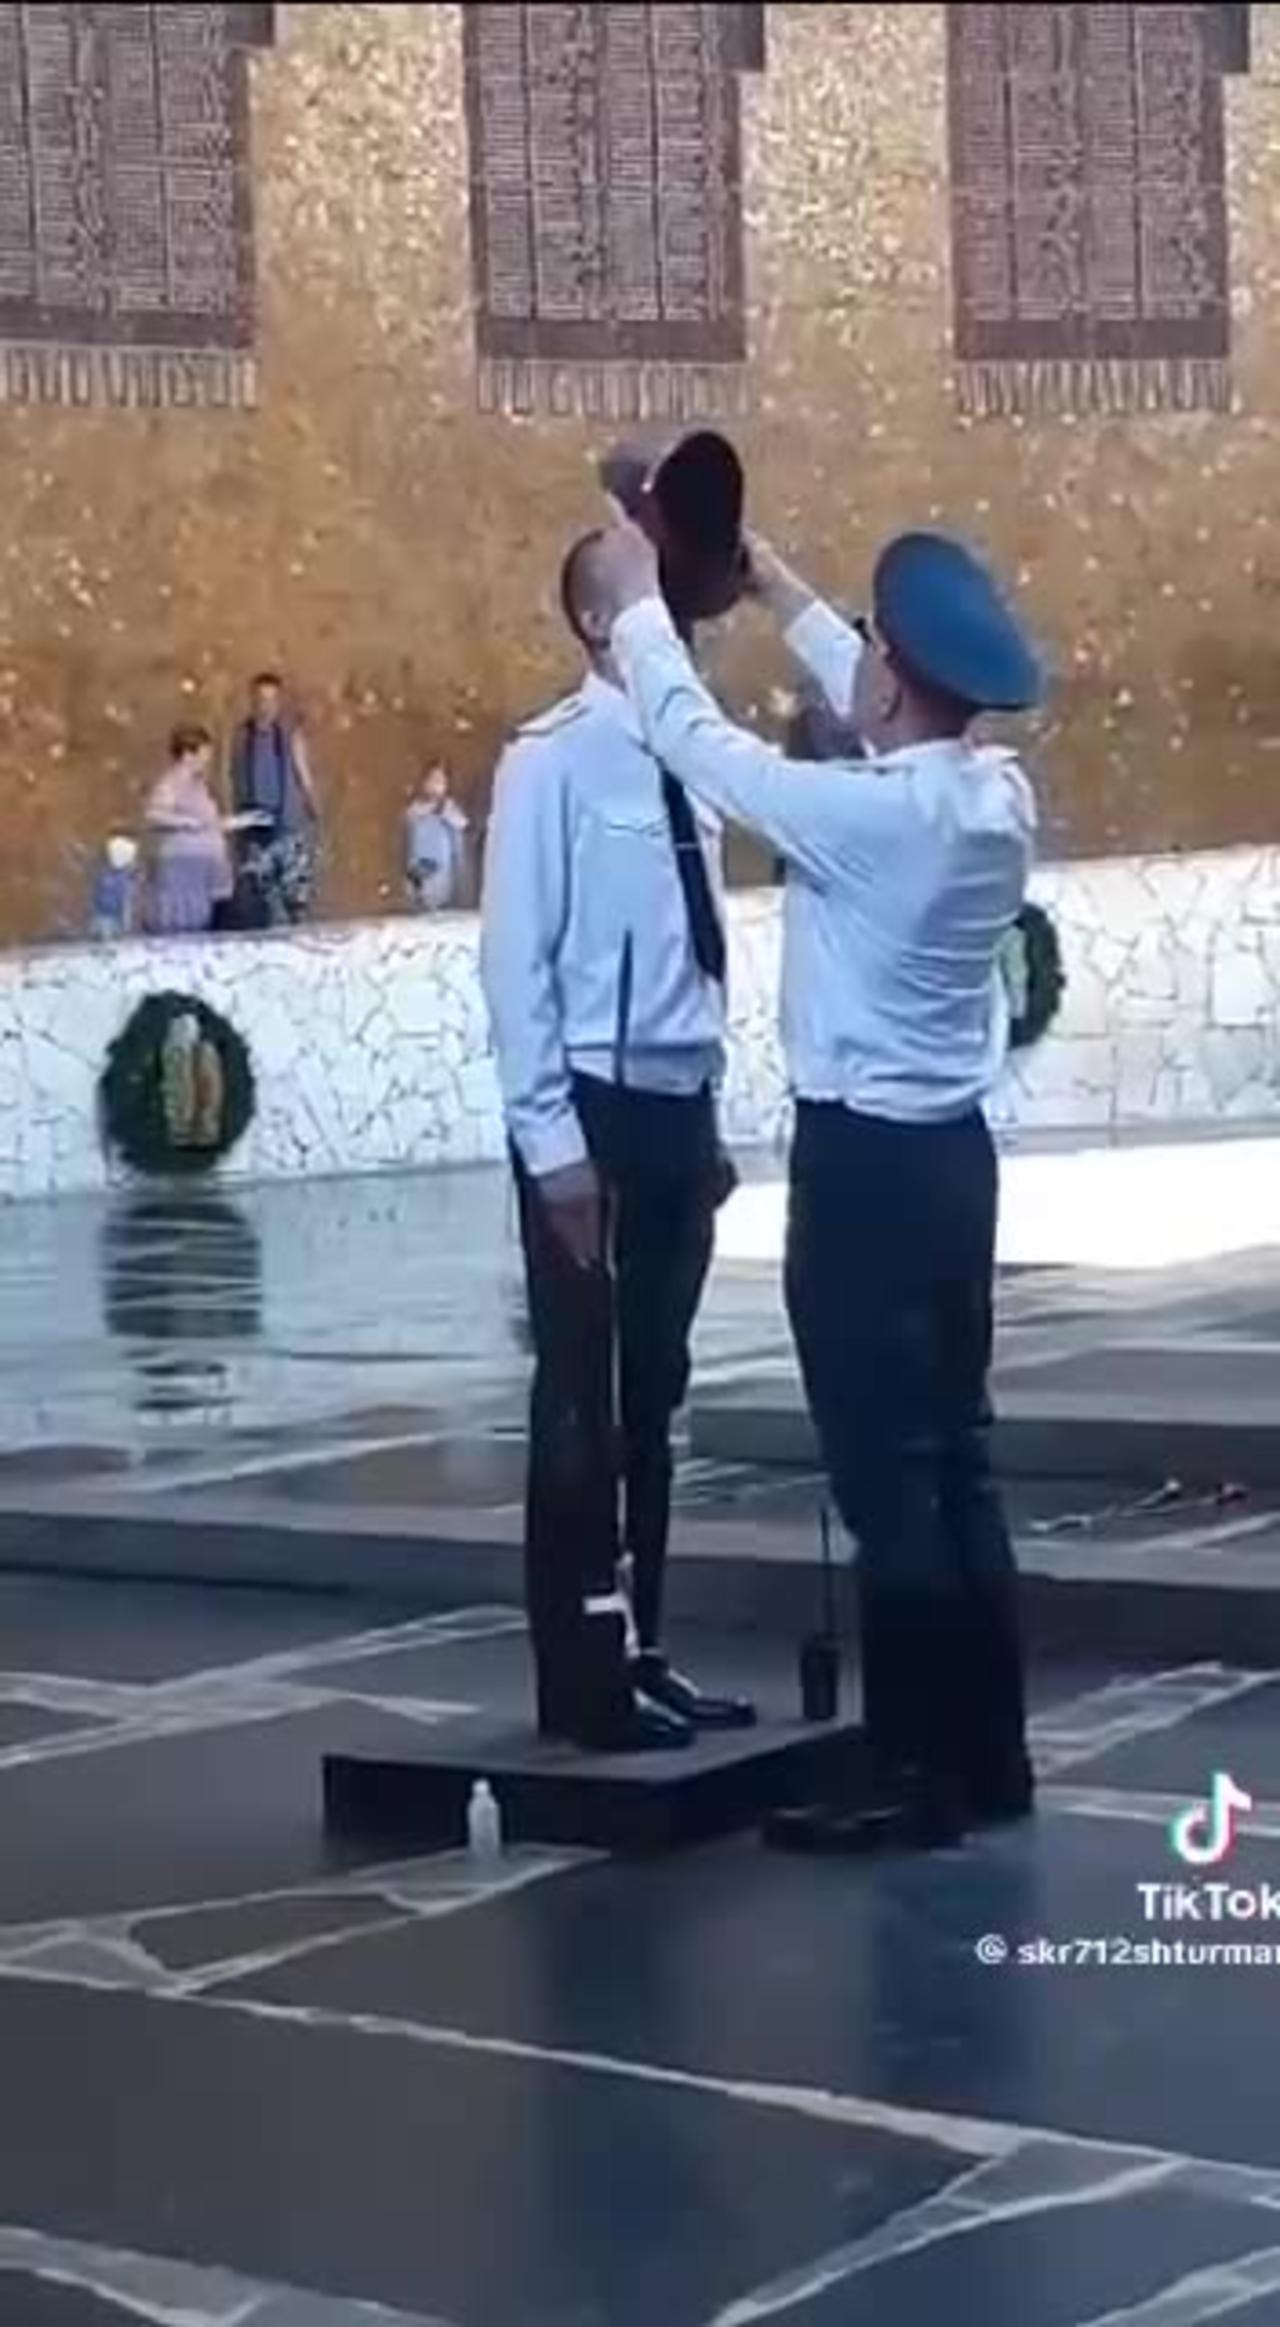 Commander shows a paternal kind of care for his subordinates serving in the Guard of Honor